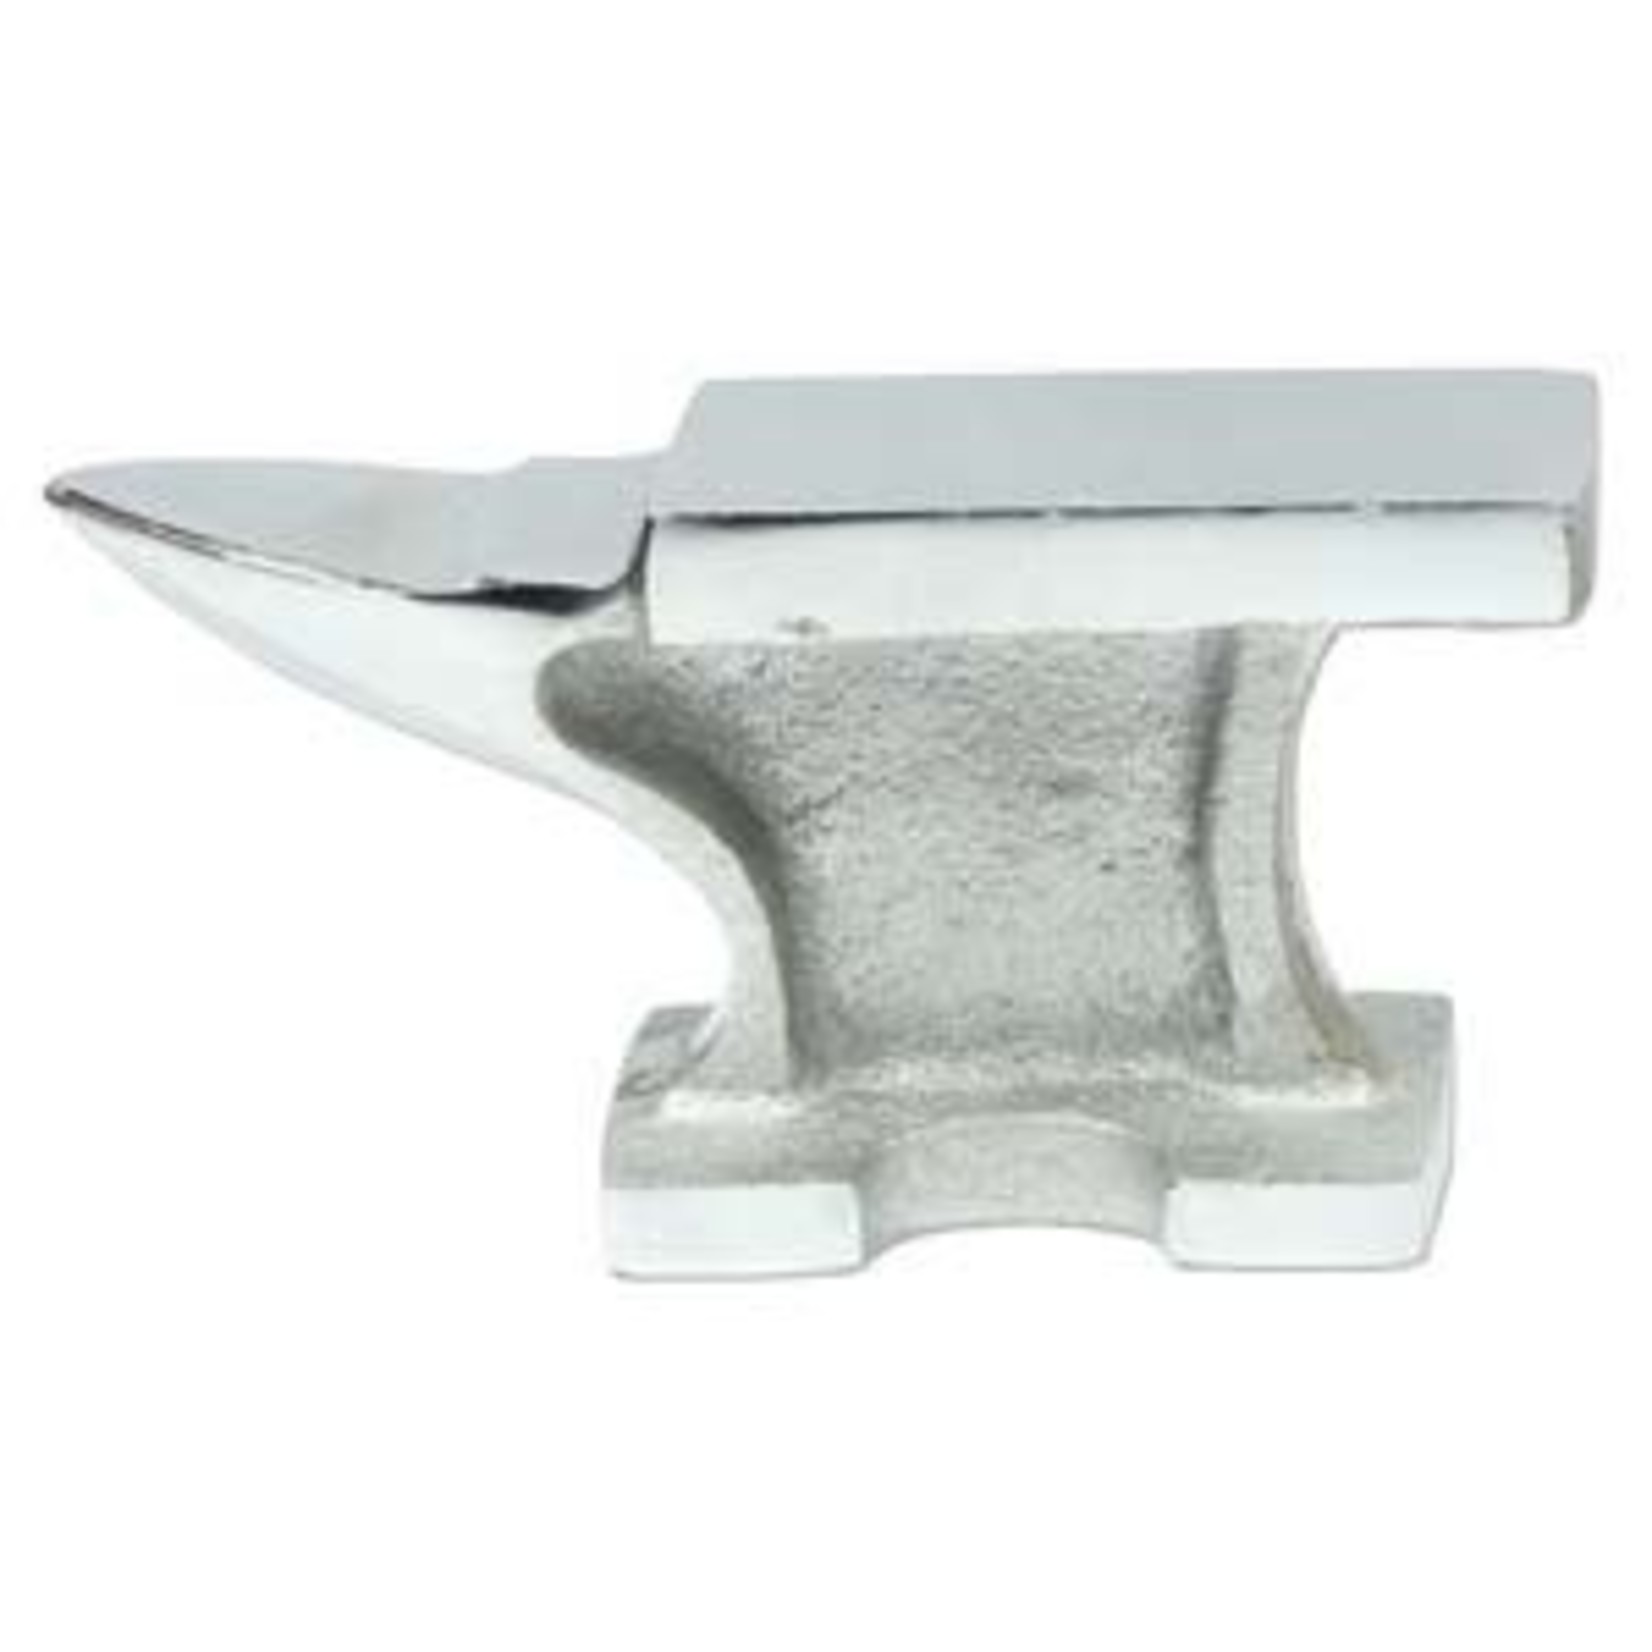 BeadSmith Steel HORN ANVIL 5 x 2.5 inches